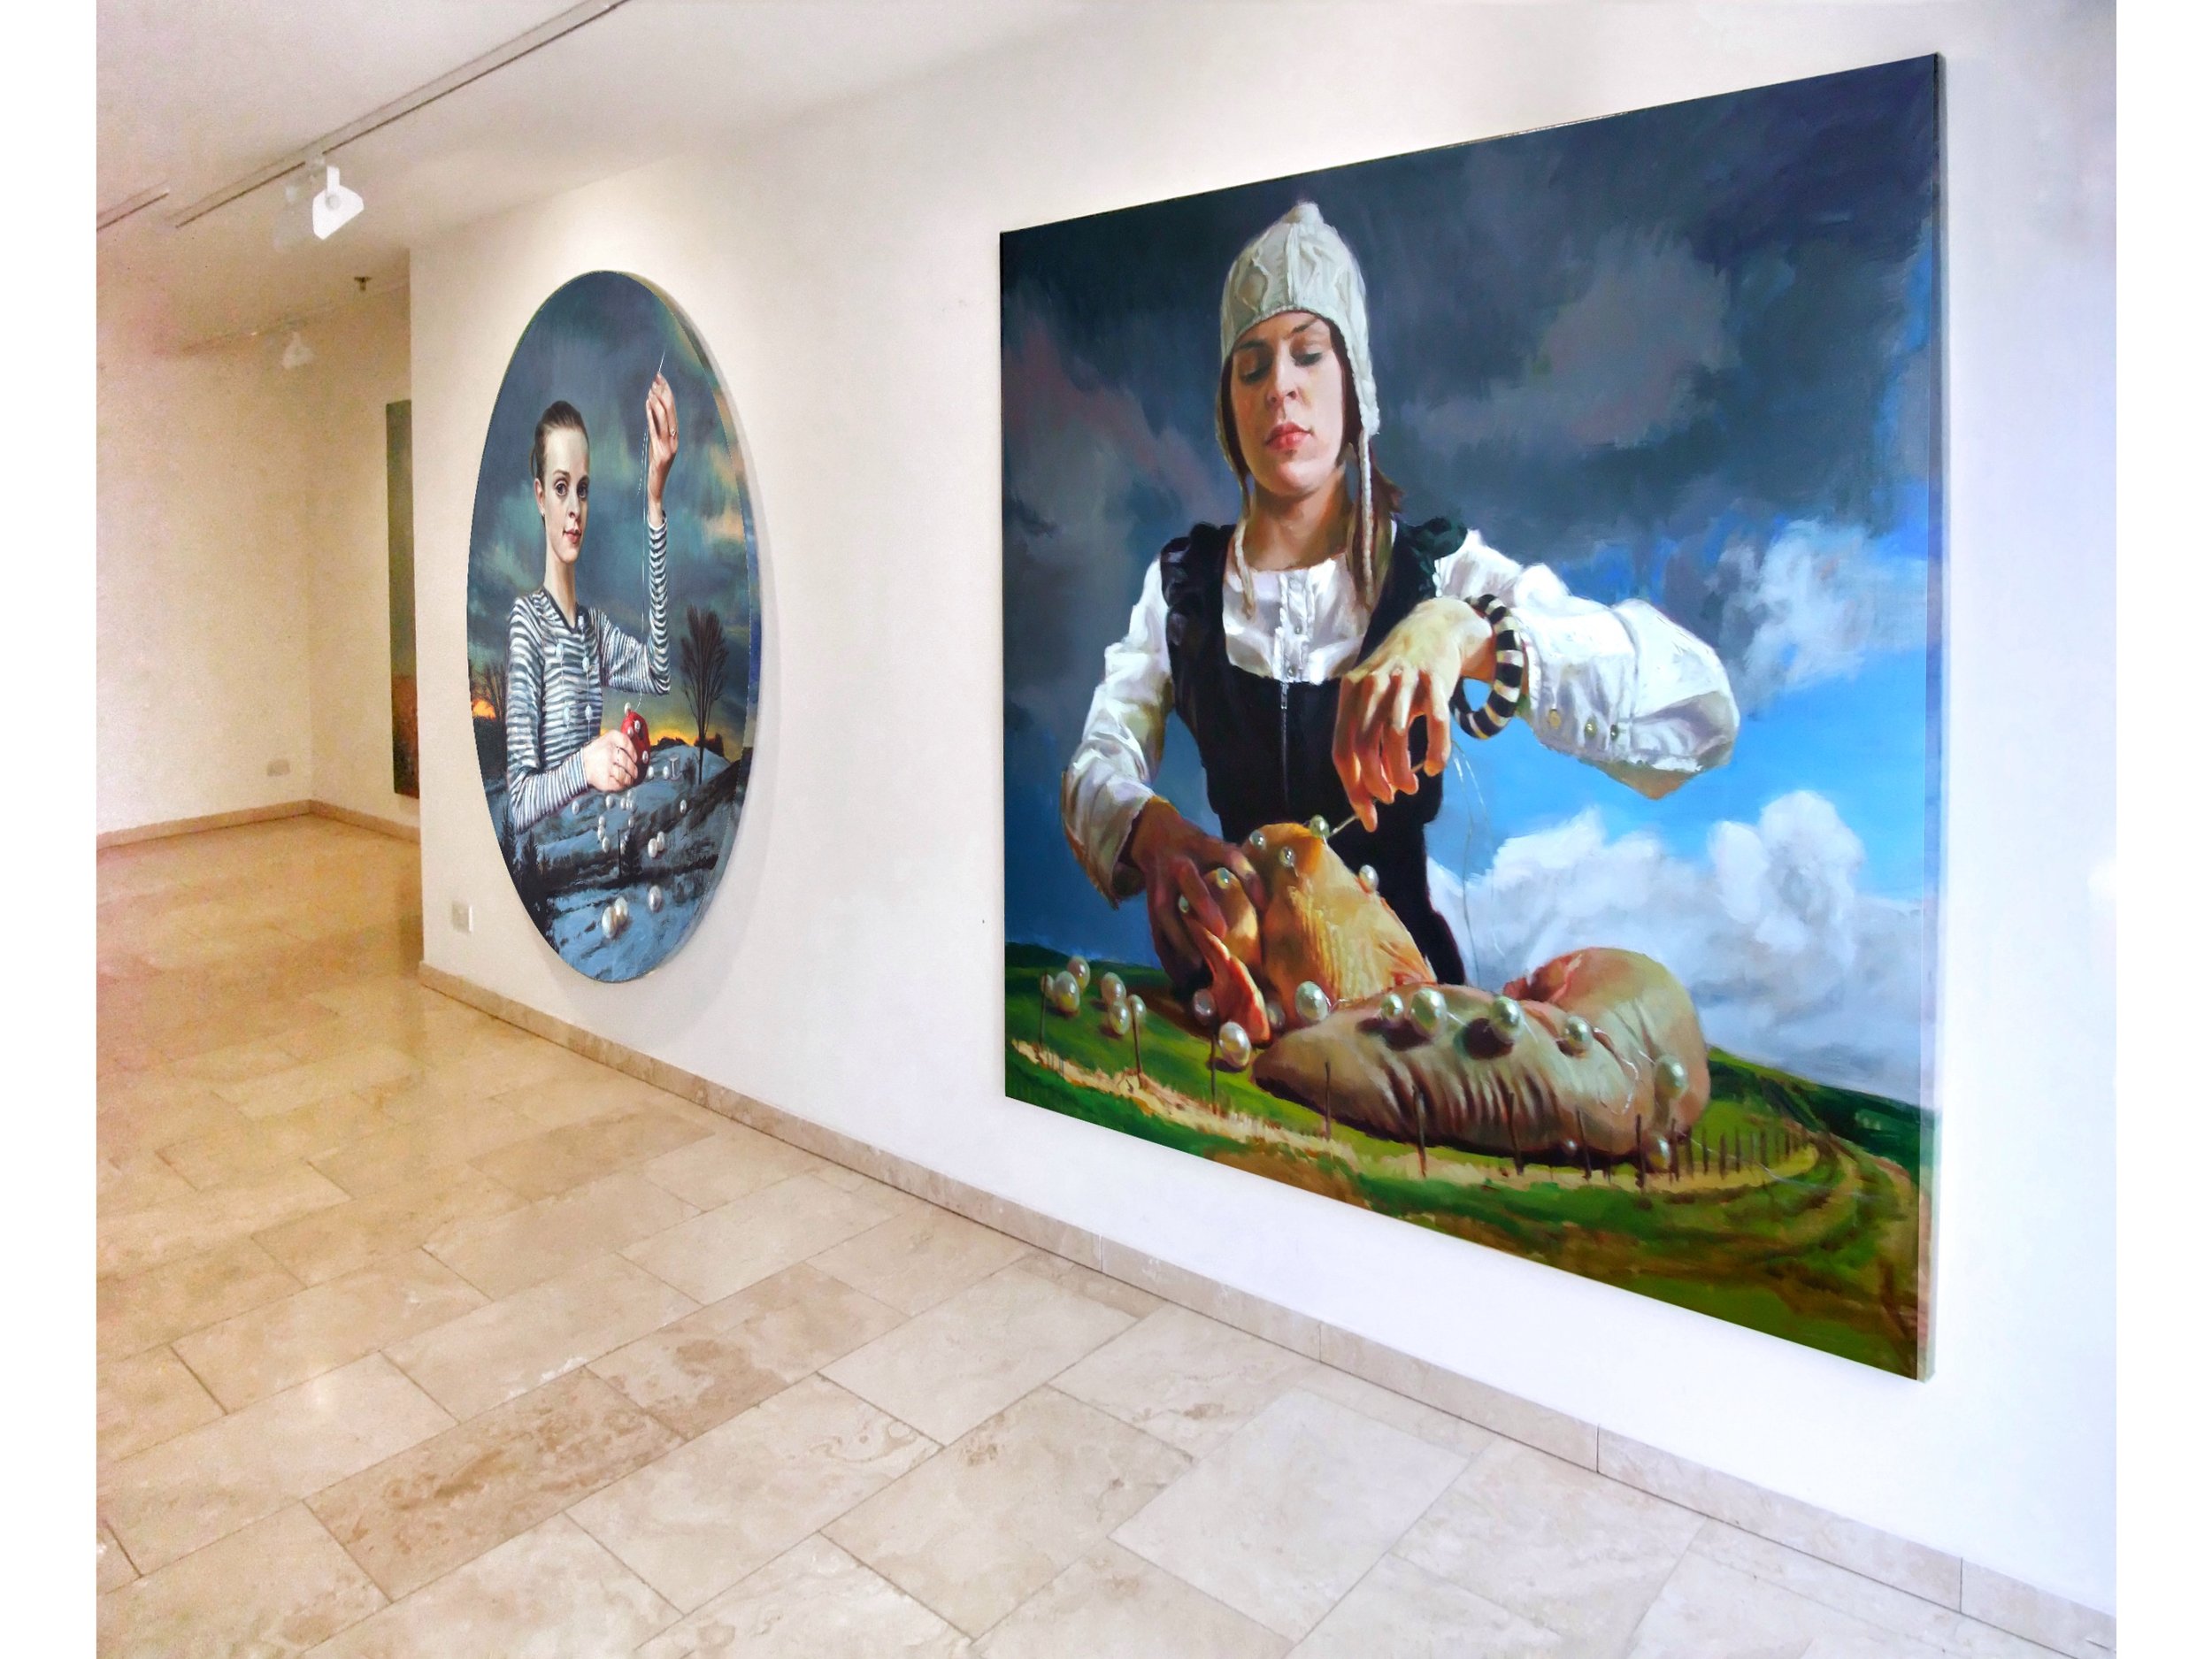 Installation view, Wyer Gallery 2009, London